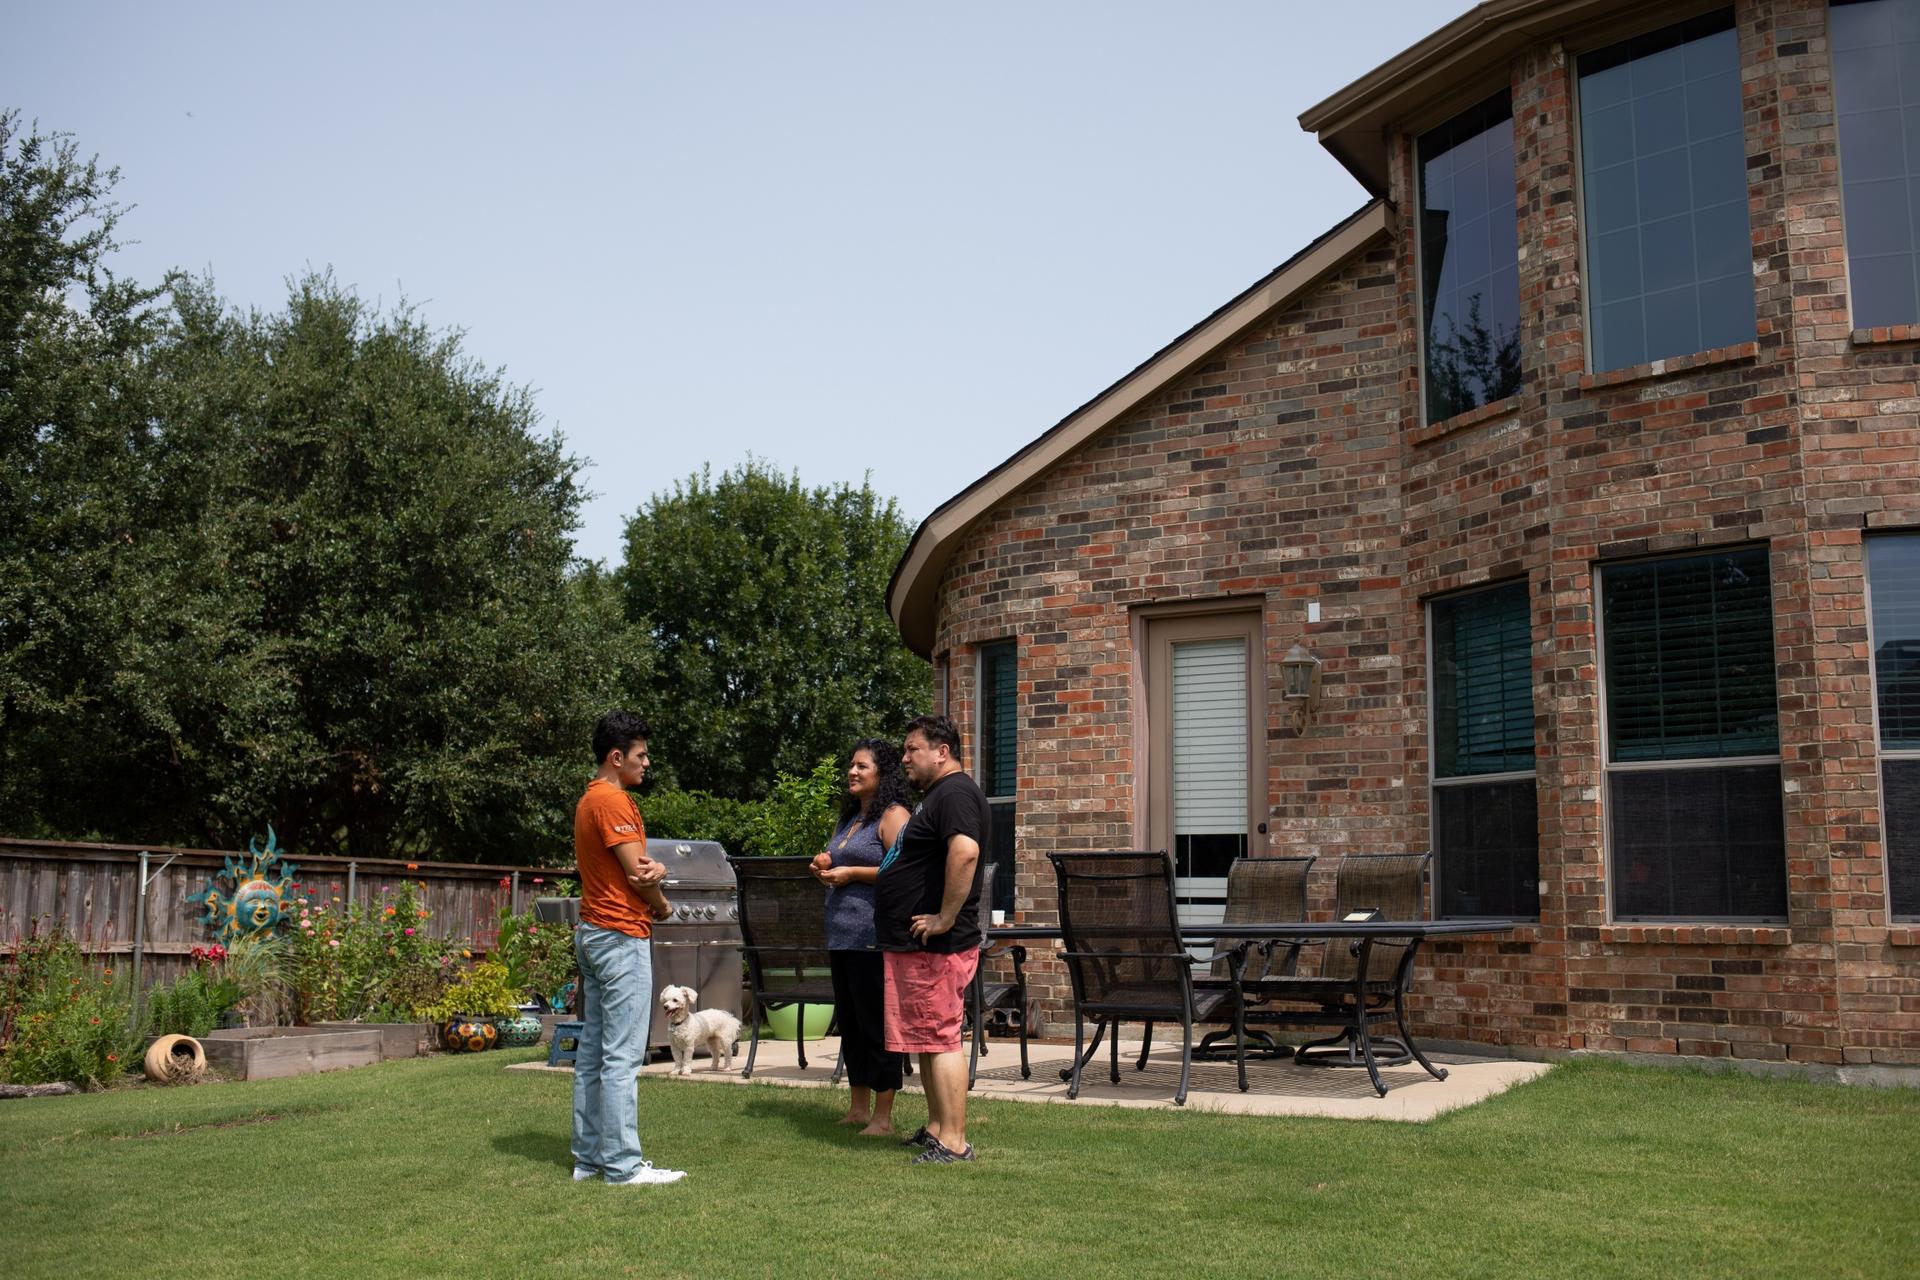 Izcan Ordaz, left, and his parents in the backyard of their home in Fort Worth, Texas.